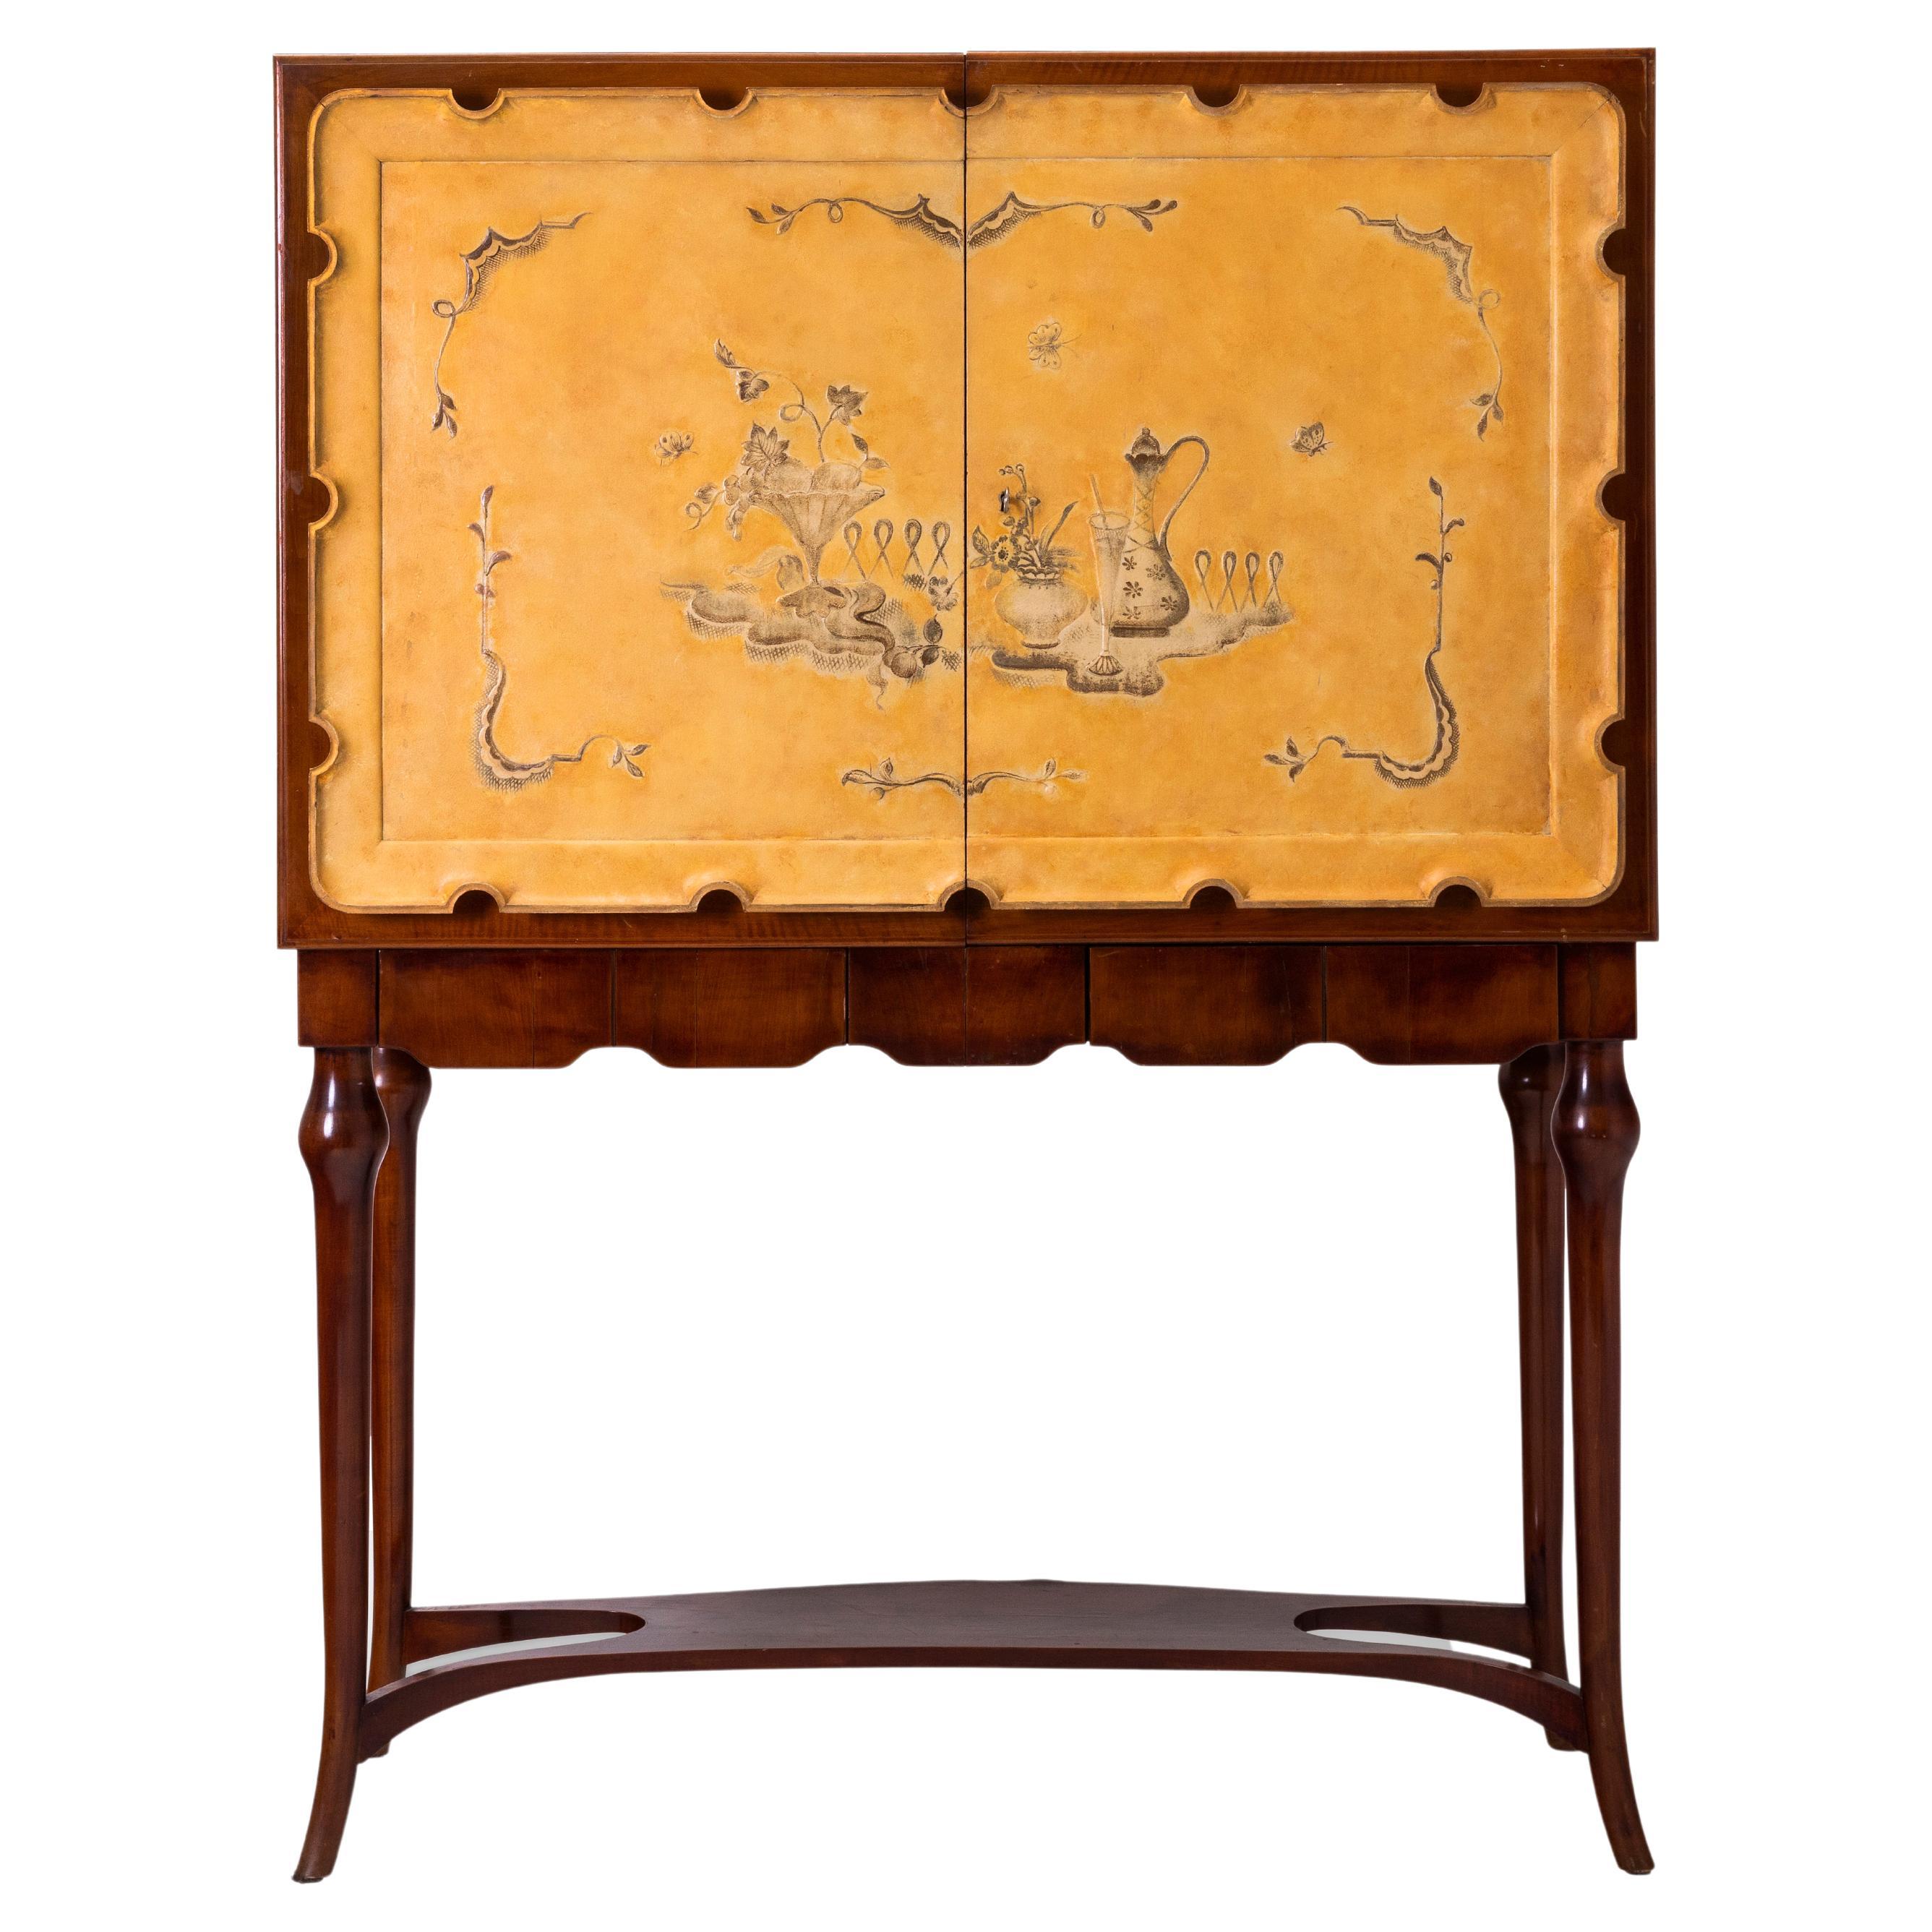 Wooden Bar Cabinet with Enamel Doors Decorated with Floral Motifs